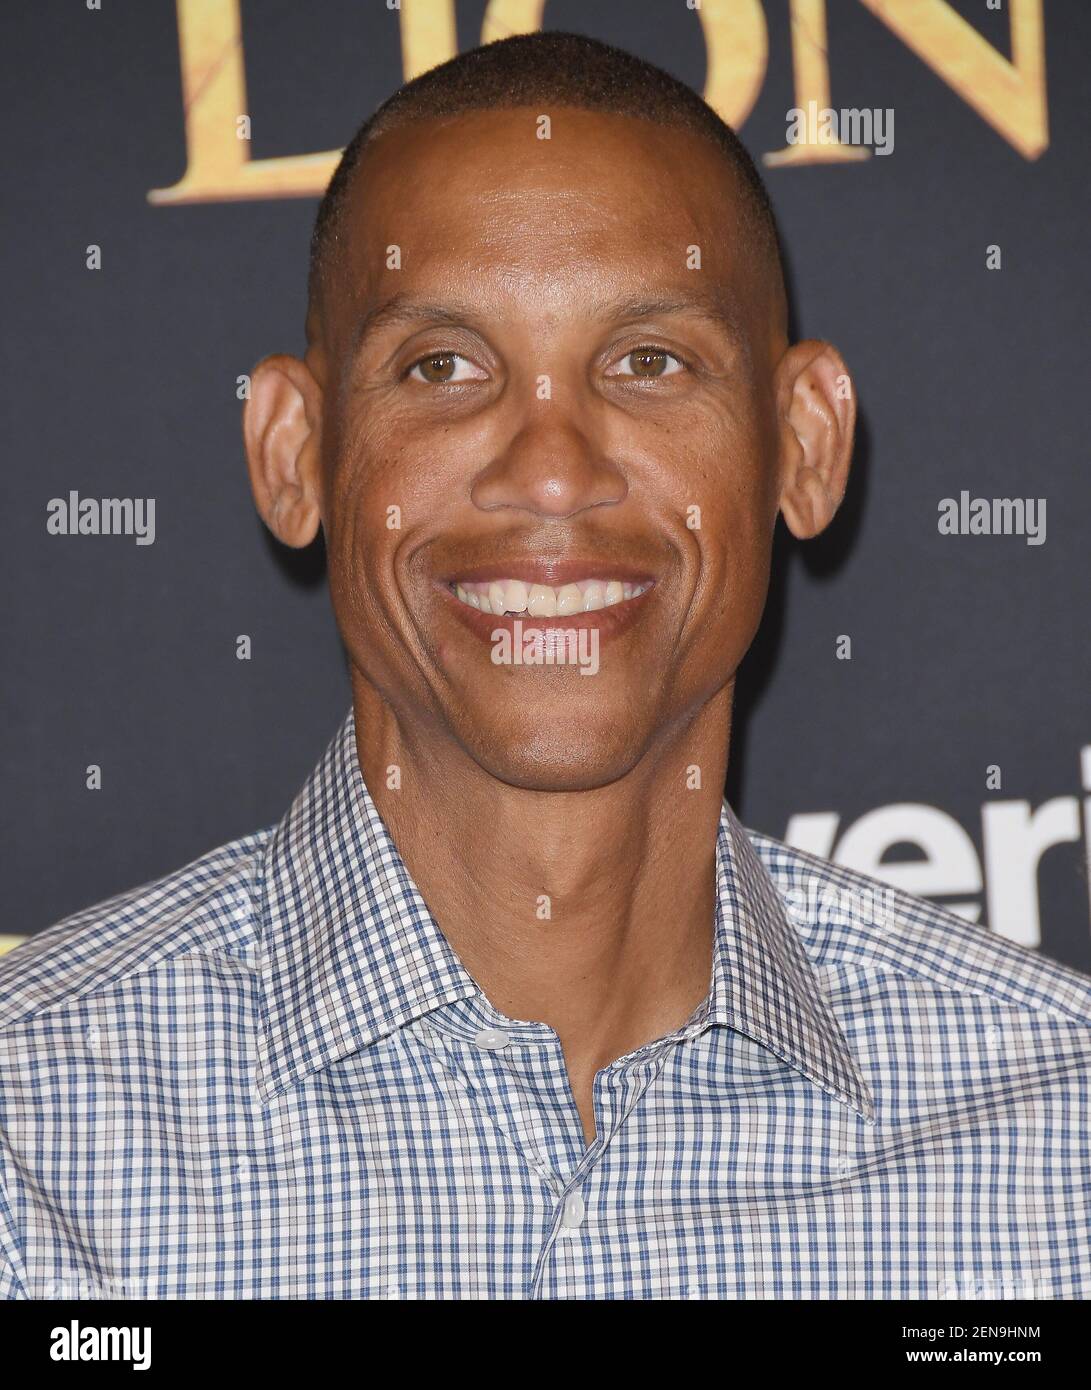 Reggie Miller arrives at the Disney's THE LION KING World Premiere held at the Dolby Theatre in Hollywood, CA on Tuesday, July 9, 2019. (Photo By Sthanlee B. Mirador/Sipa USA) Stock Photo